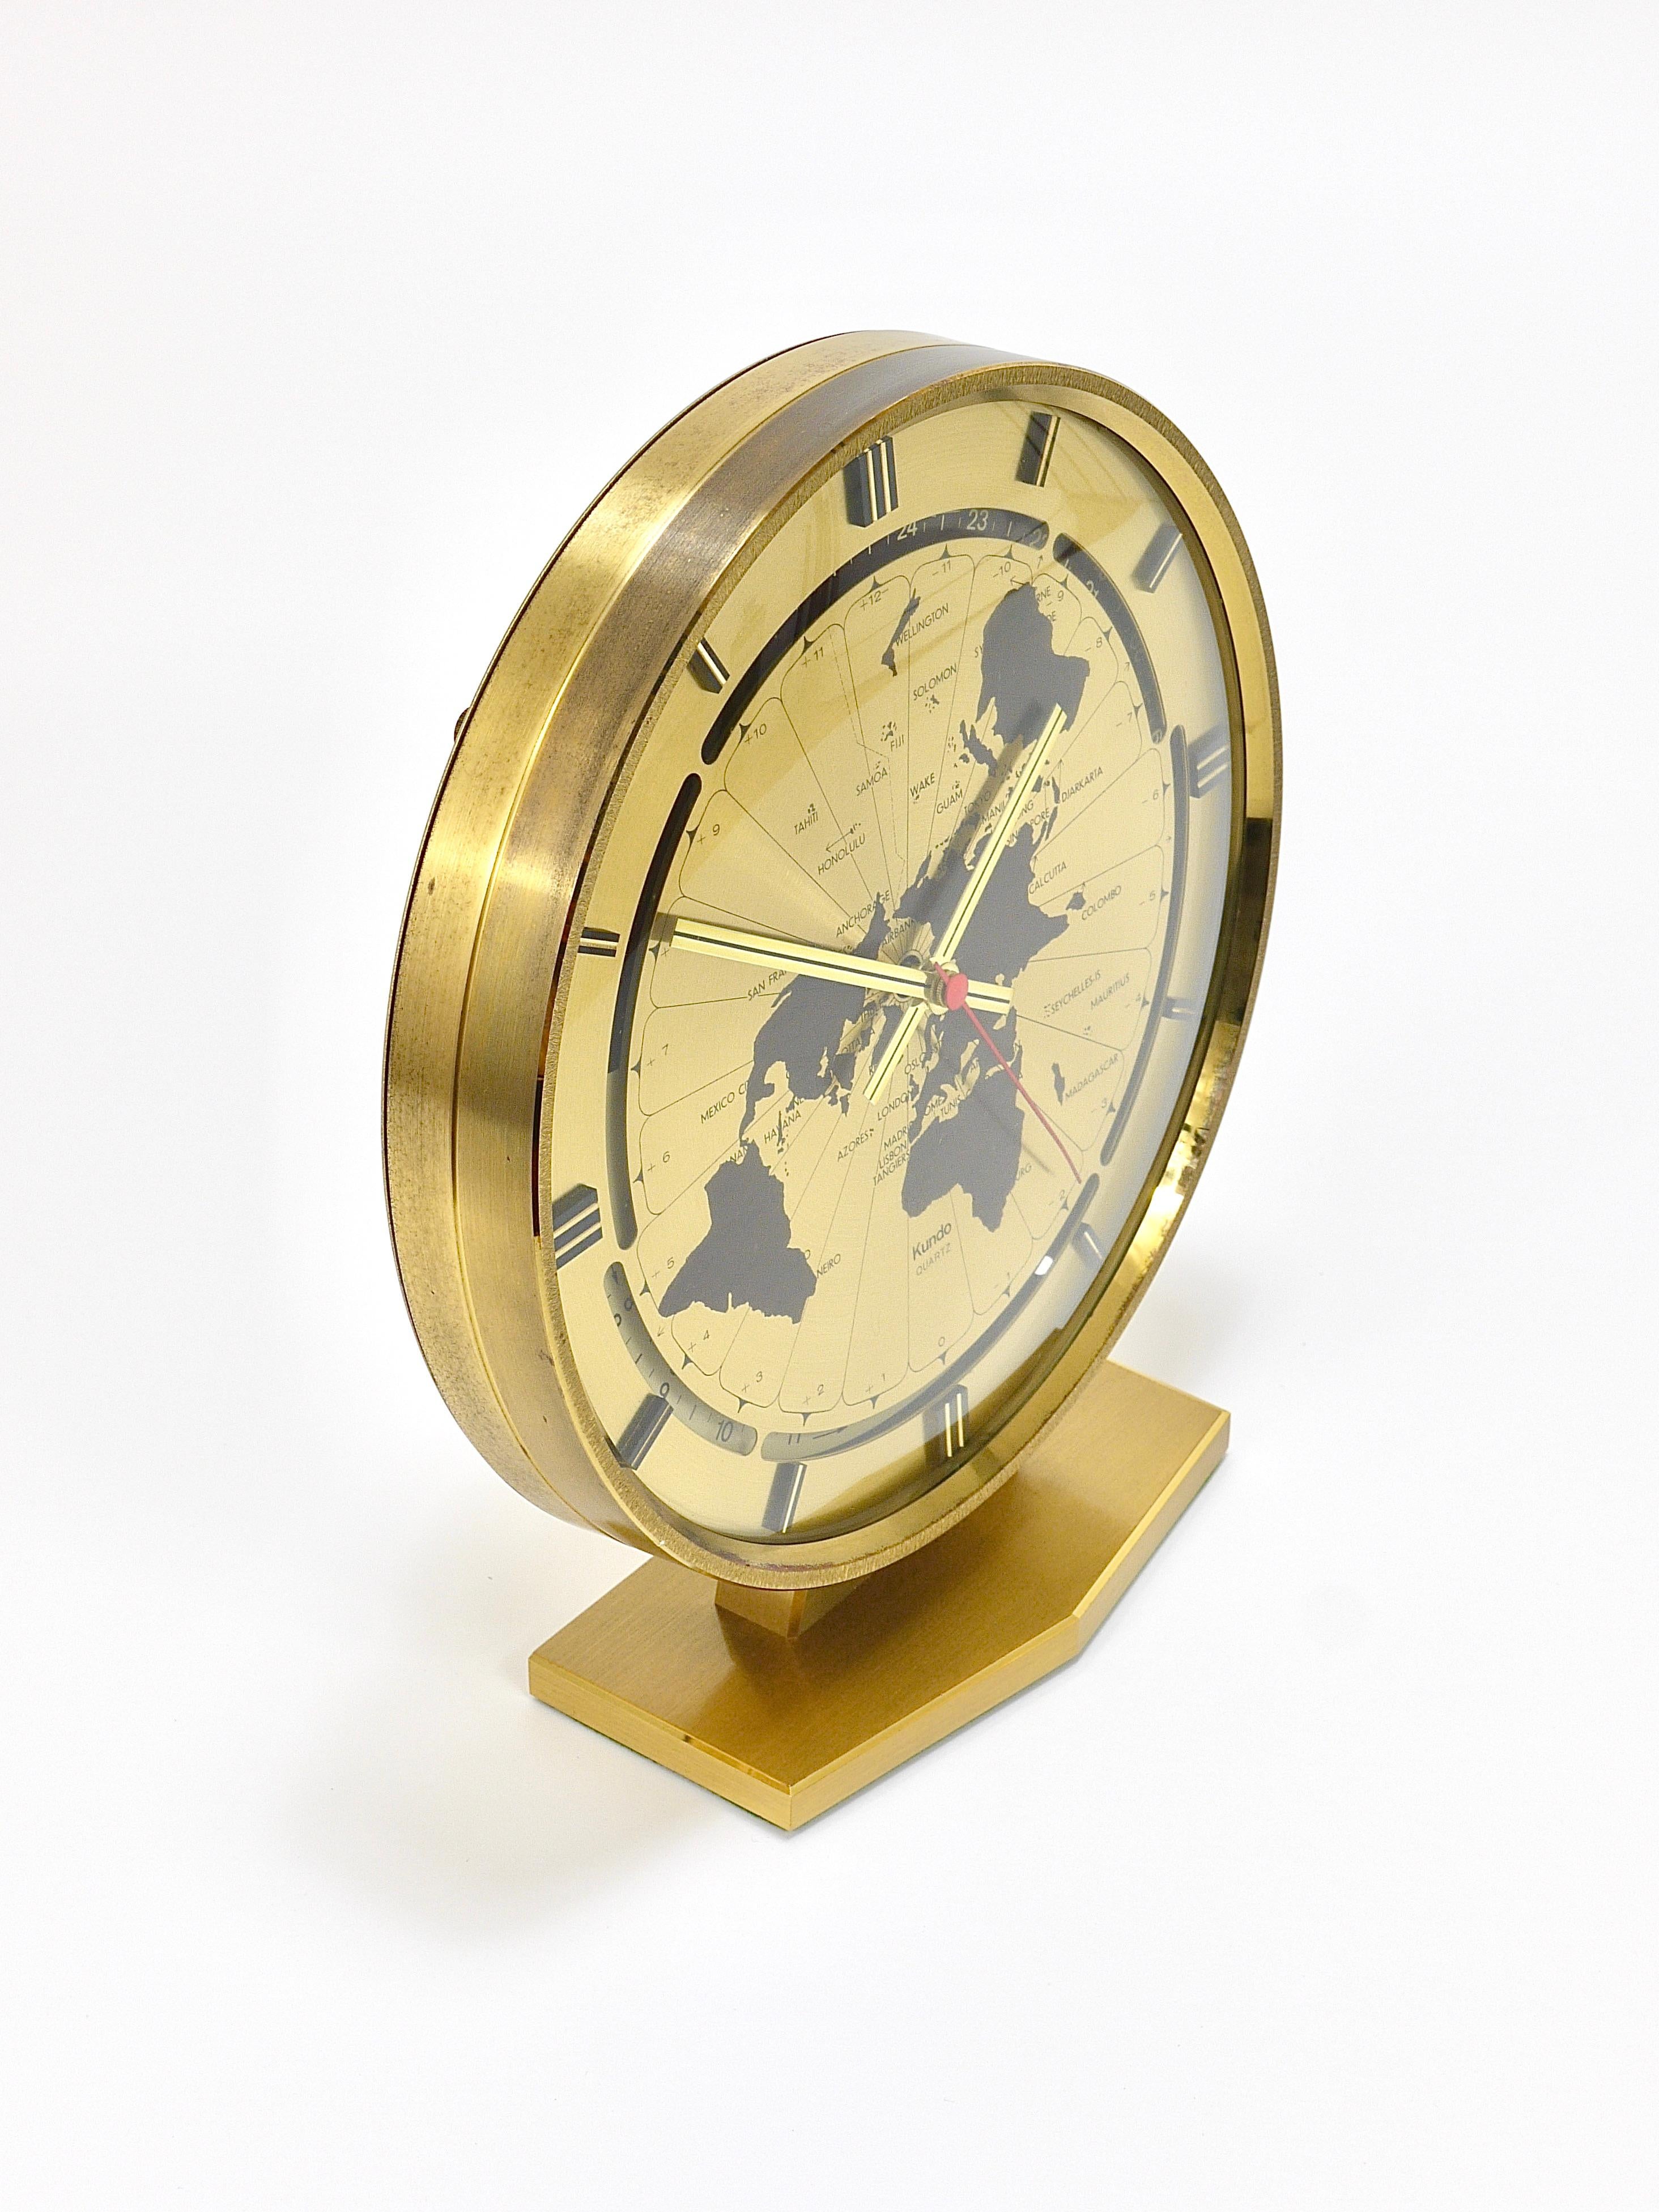 20th Century Large Kundo GMT World Time Zone Brass Table Clock, Kieninger & Obergfell, 1960s For Sale